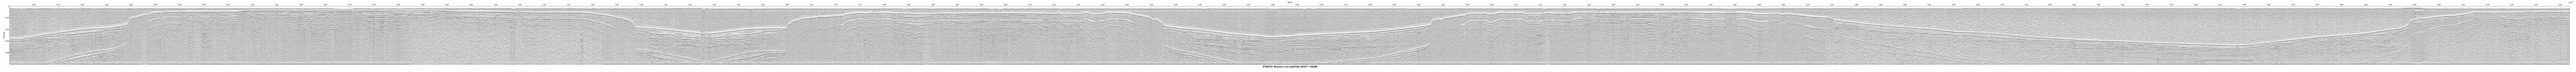 Thumbnail GIF image of the seismic trackline key9722c, with a hotlink to the more detailed, larger JPG image.